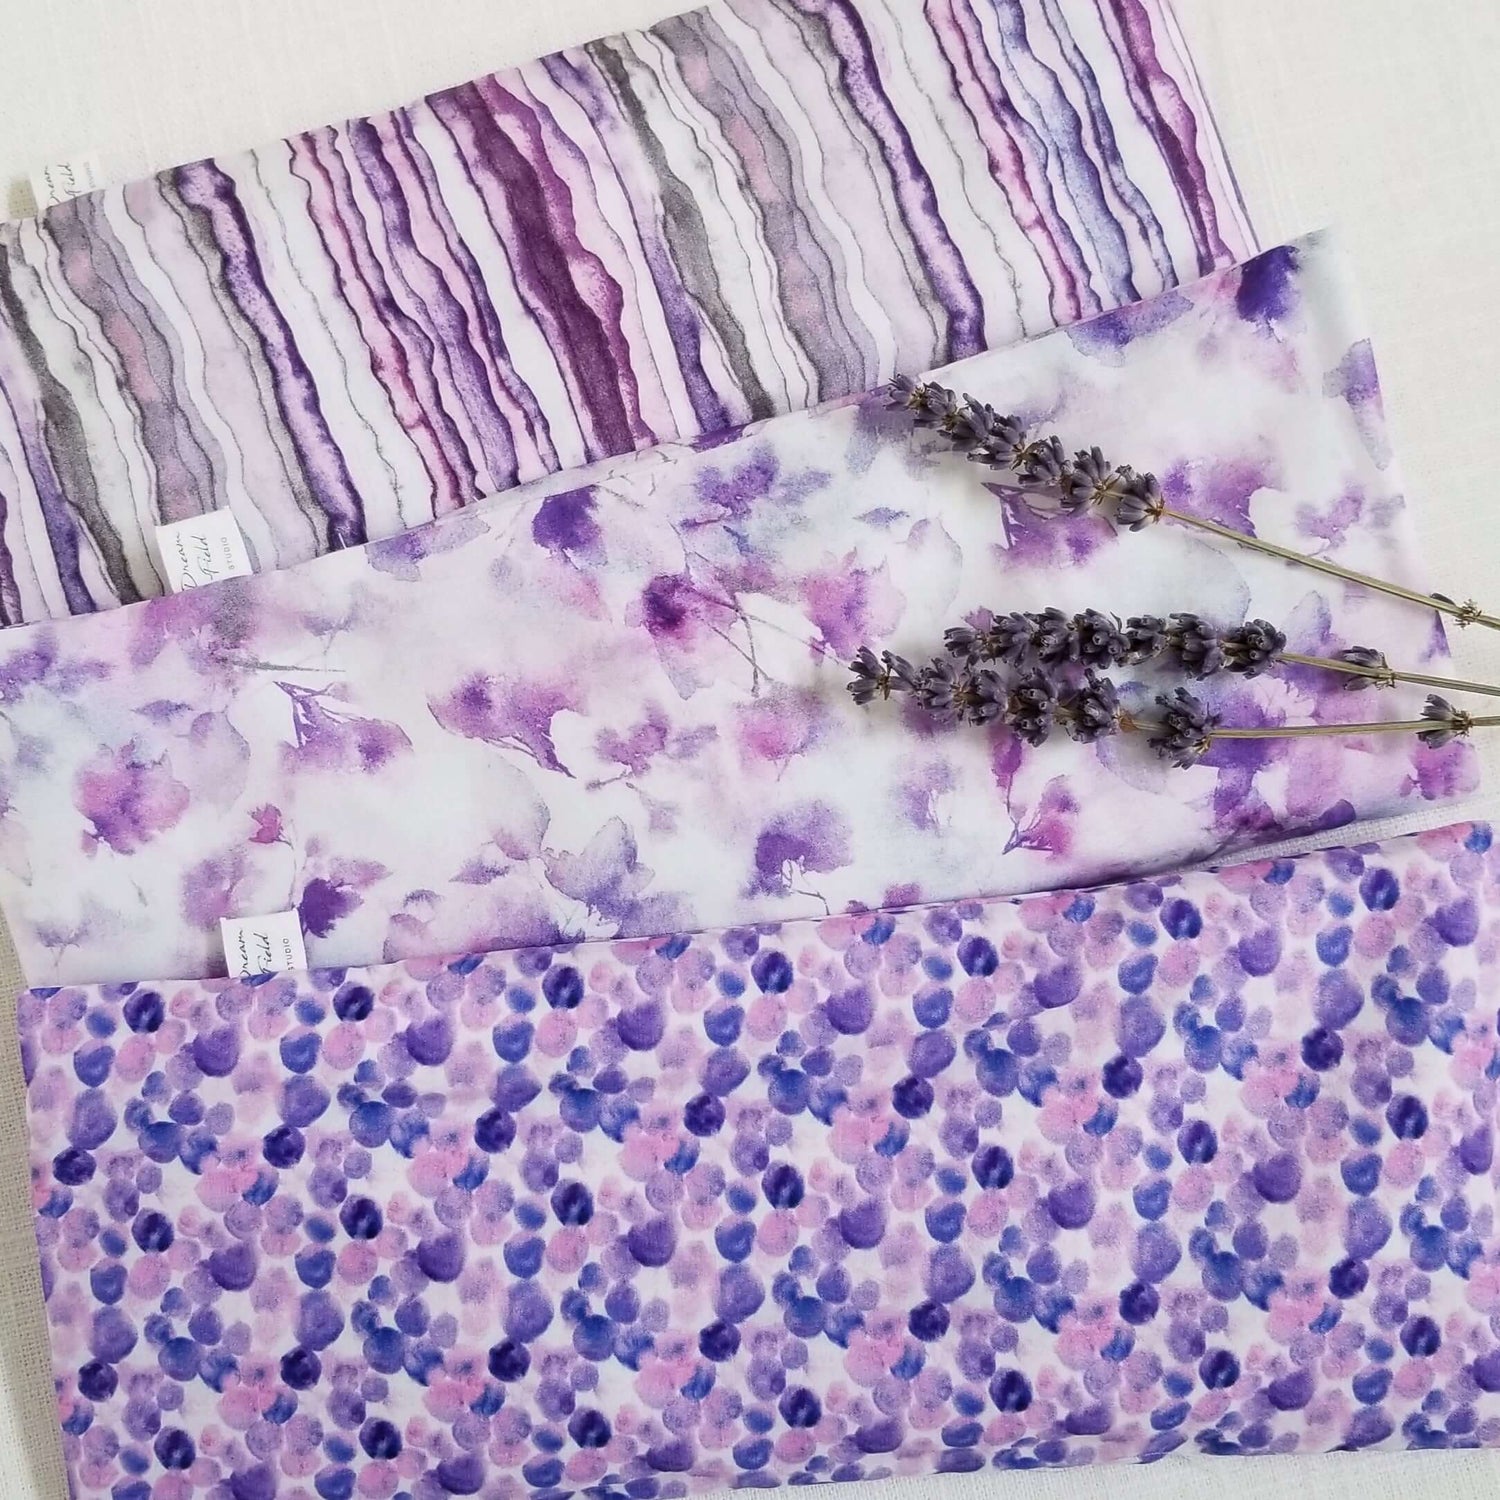 3 lavender eye pillows and dried lavender stems